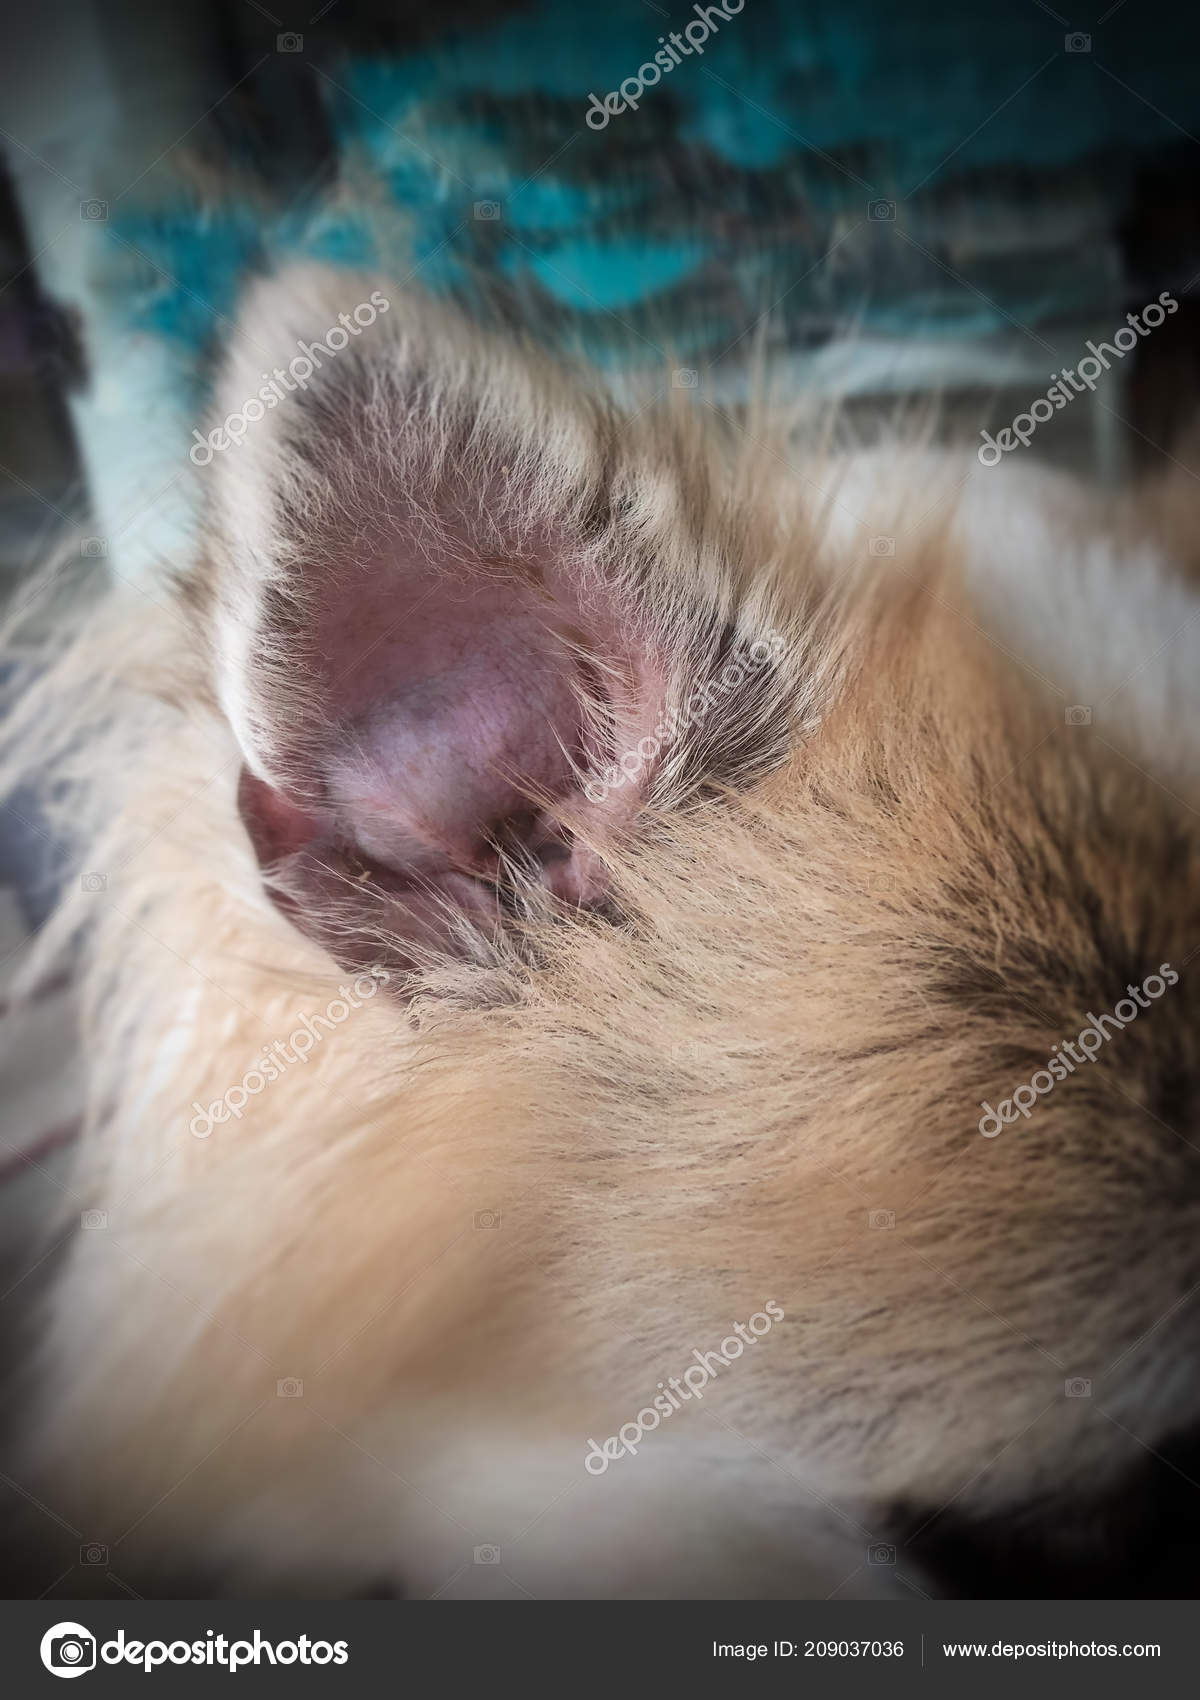 45 Top Images Aural Hematoma Cat Cost - 10 Reasons To Adopt A Cat | Houston PetTalk | Houston PetTalk